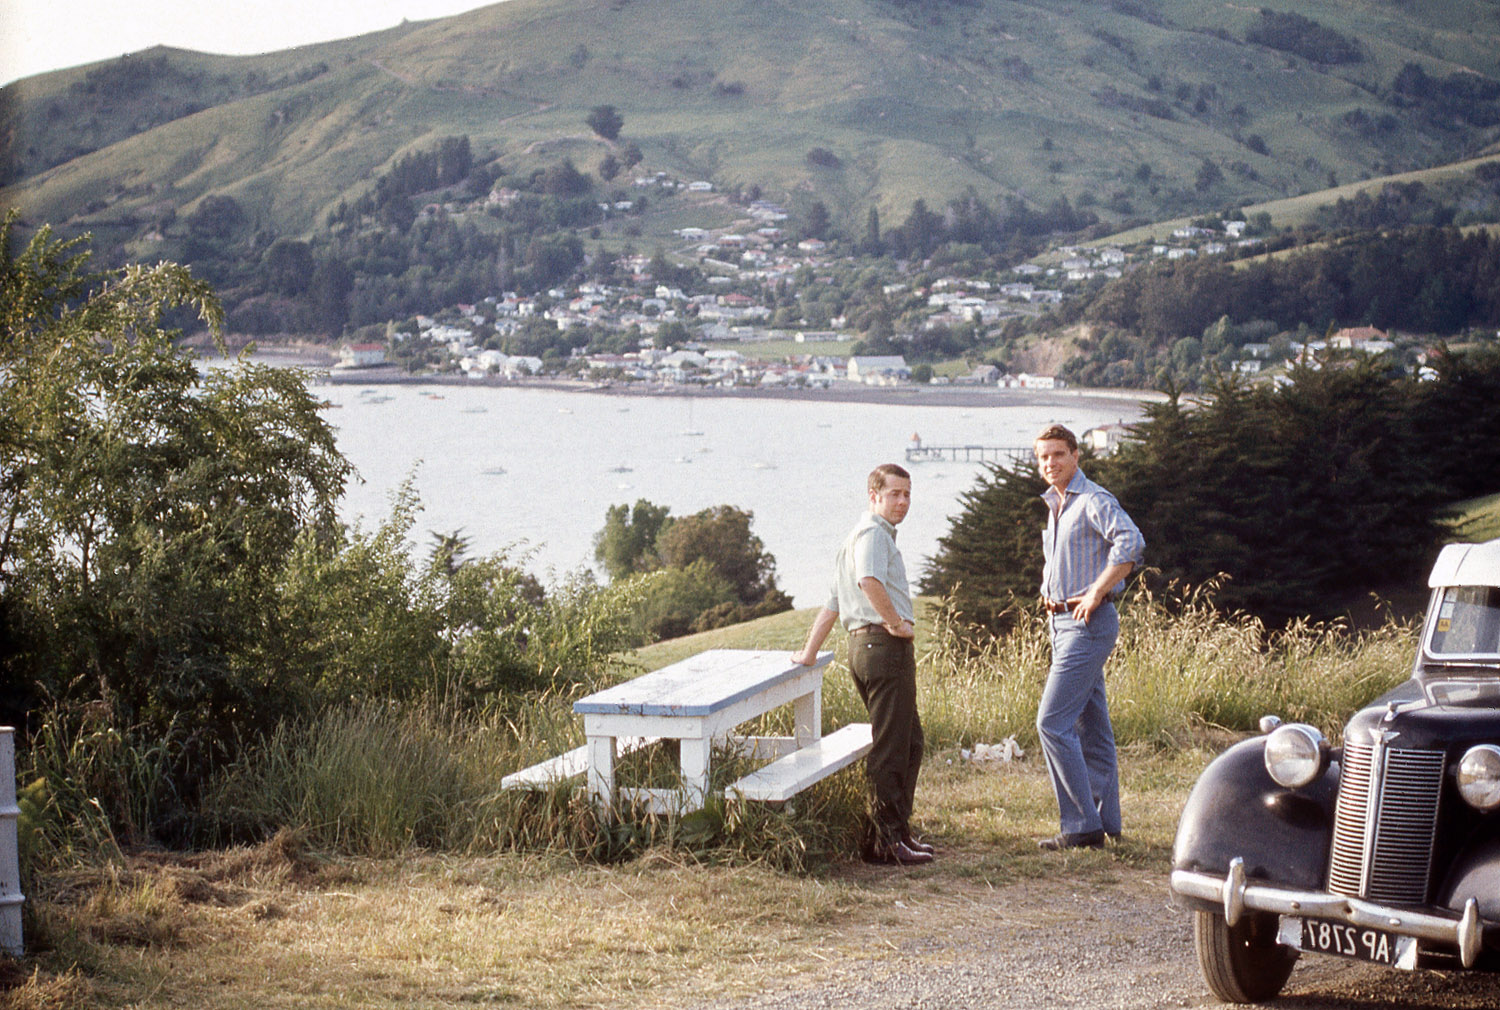 People - Resting in New Zealand